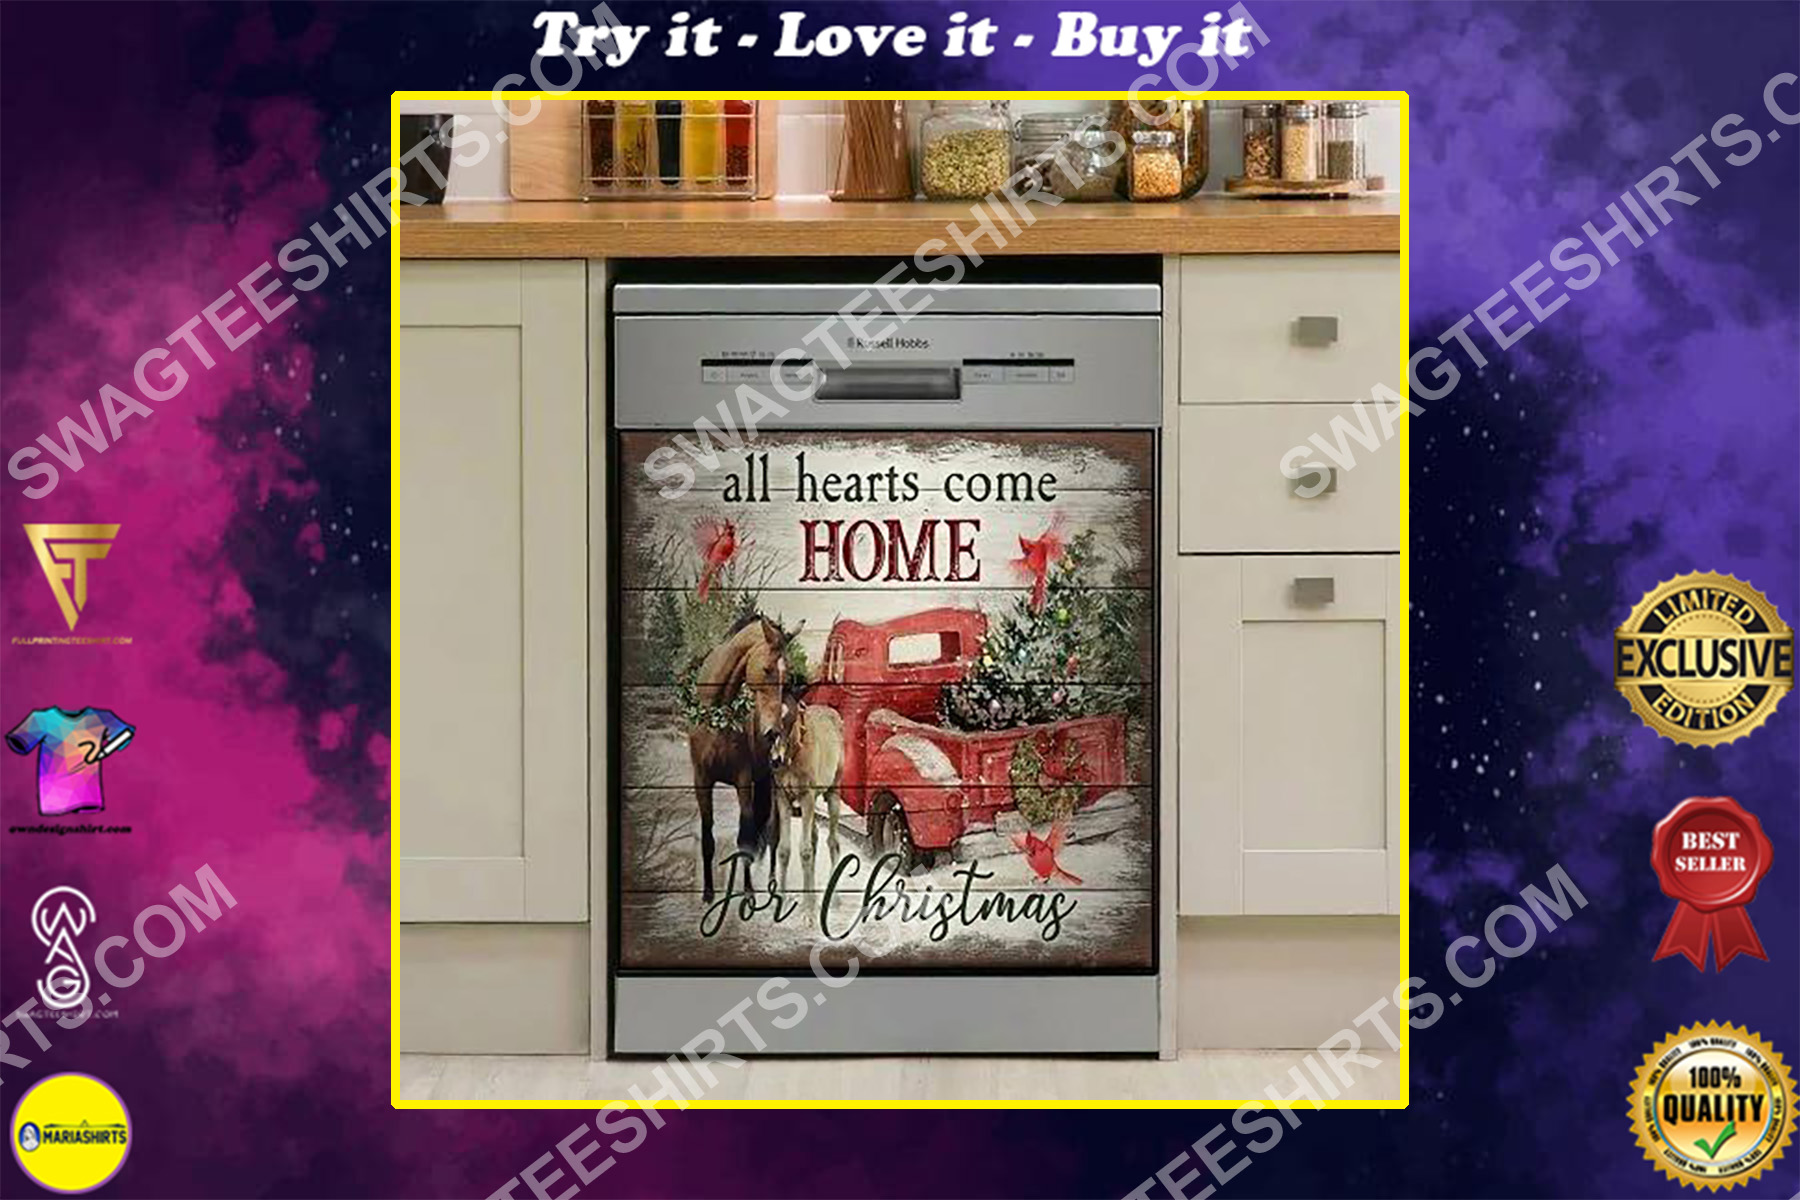 all hearts come home for christmas kitchen decorative dishwasher magnet cover